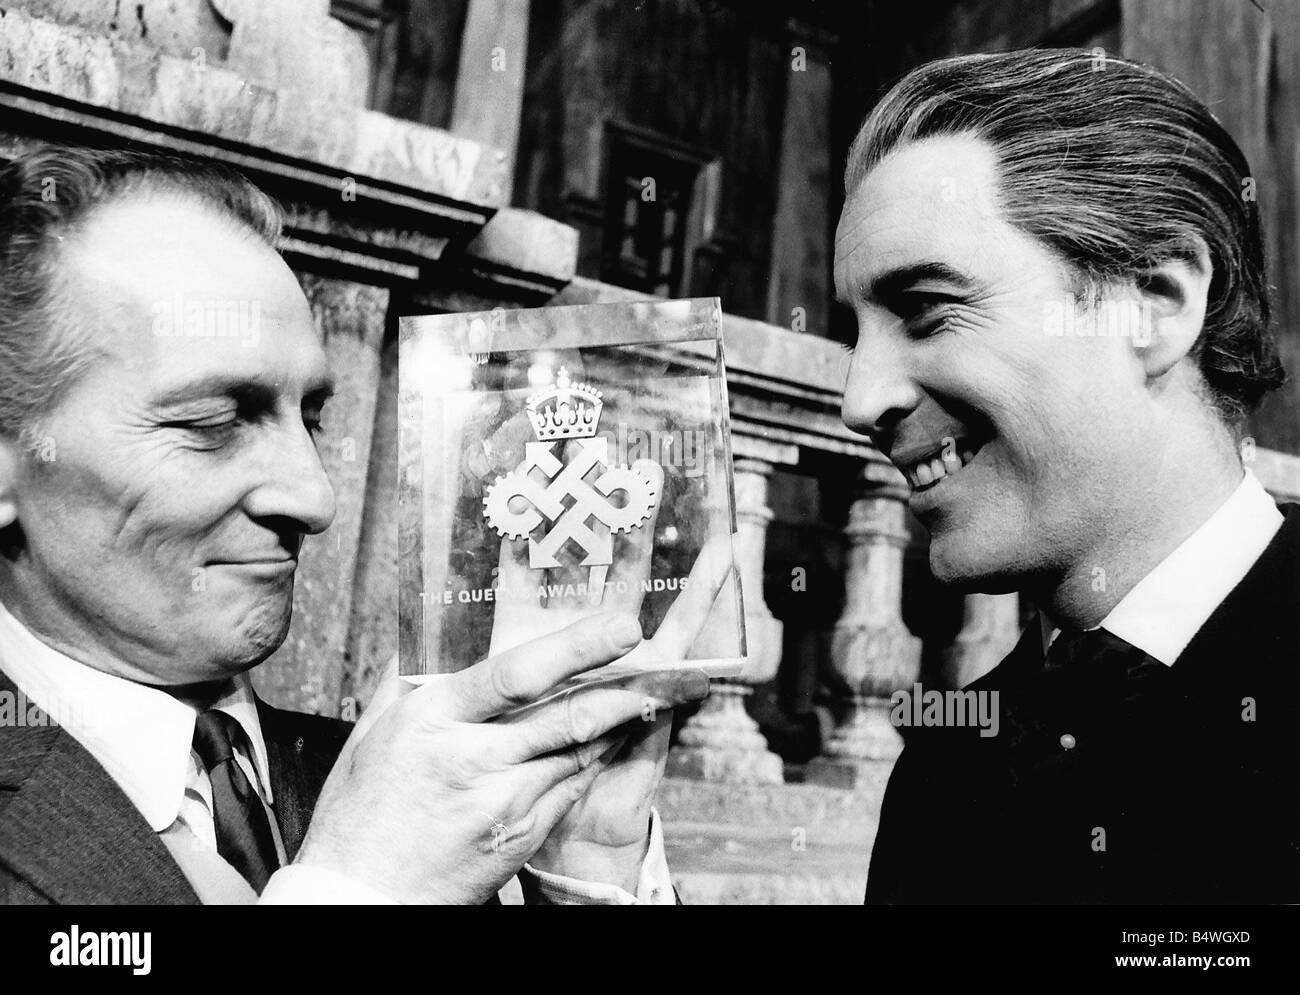 Christopher Lee with Peter Cushing with the The Queen s award for industry  which had been awarded to Hammer Films dbase msi Stock Photo - Alamy